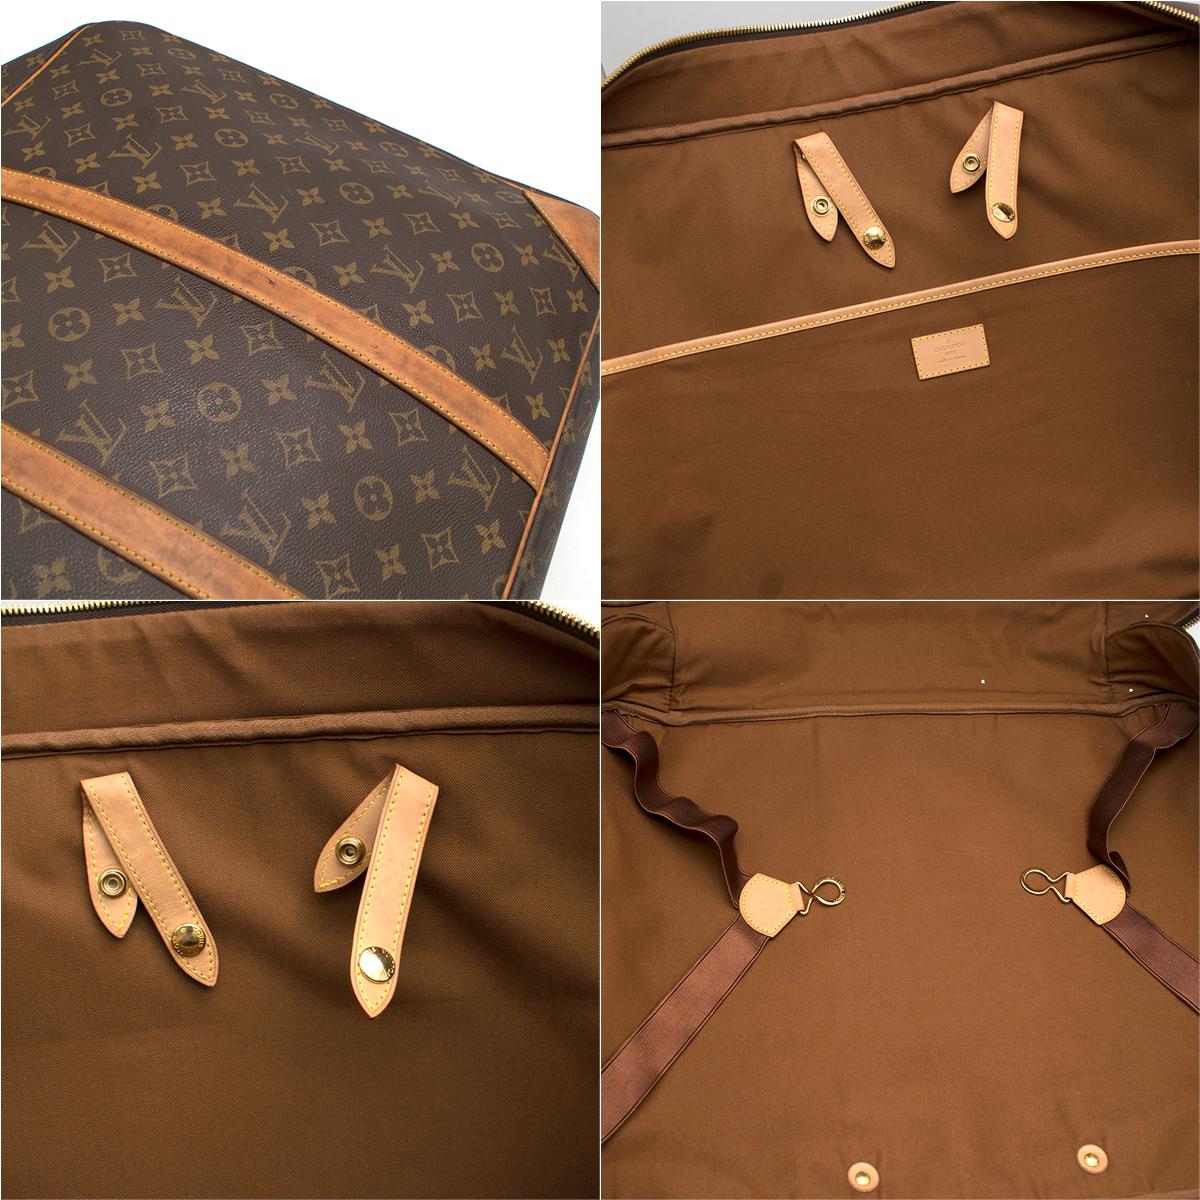 Louis Vuitton Sirius 55 Soft sided Luggage One size 4